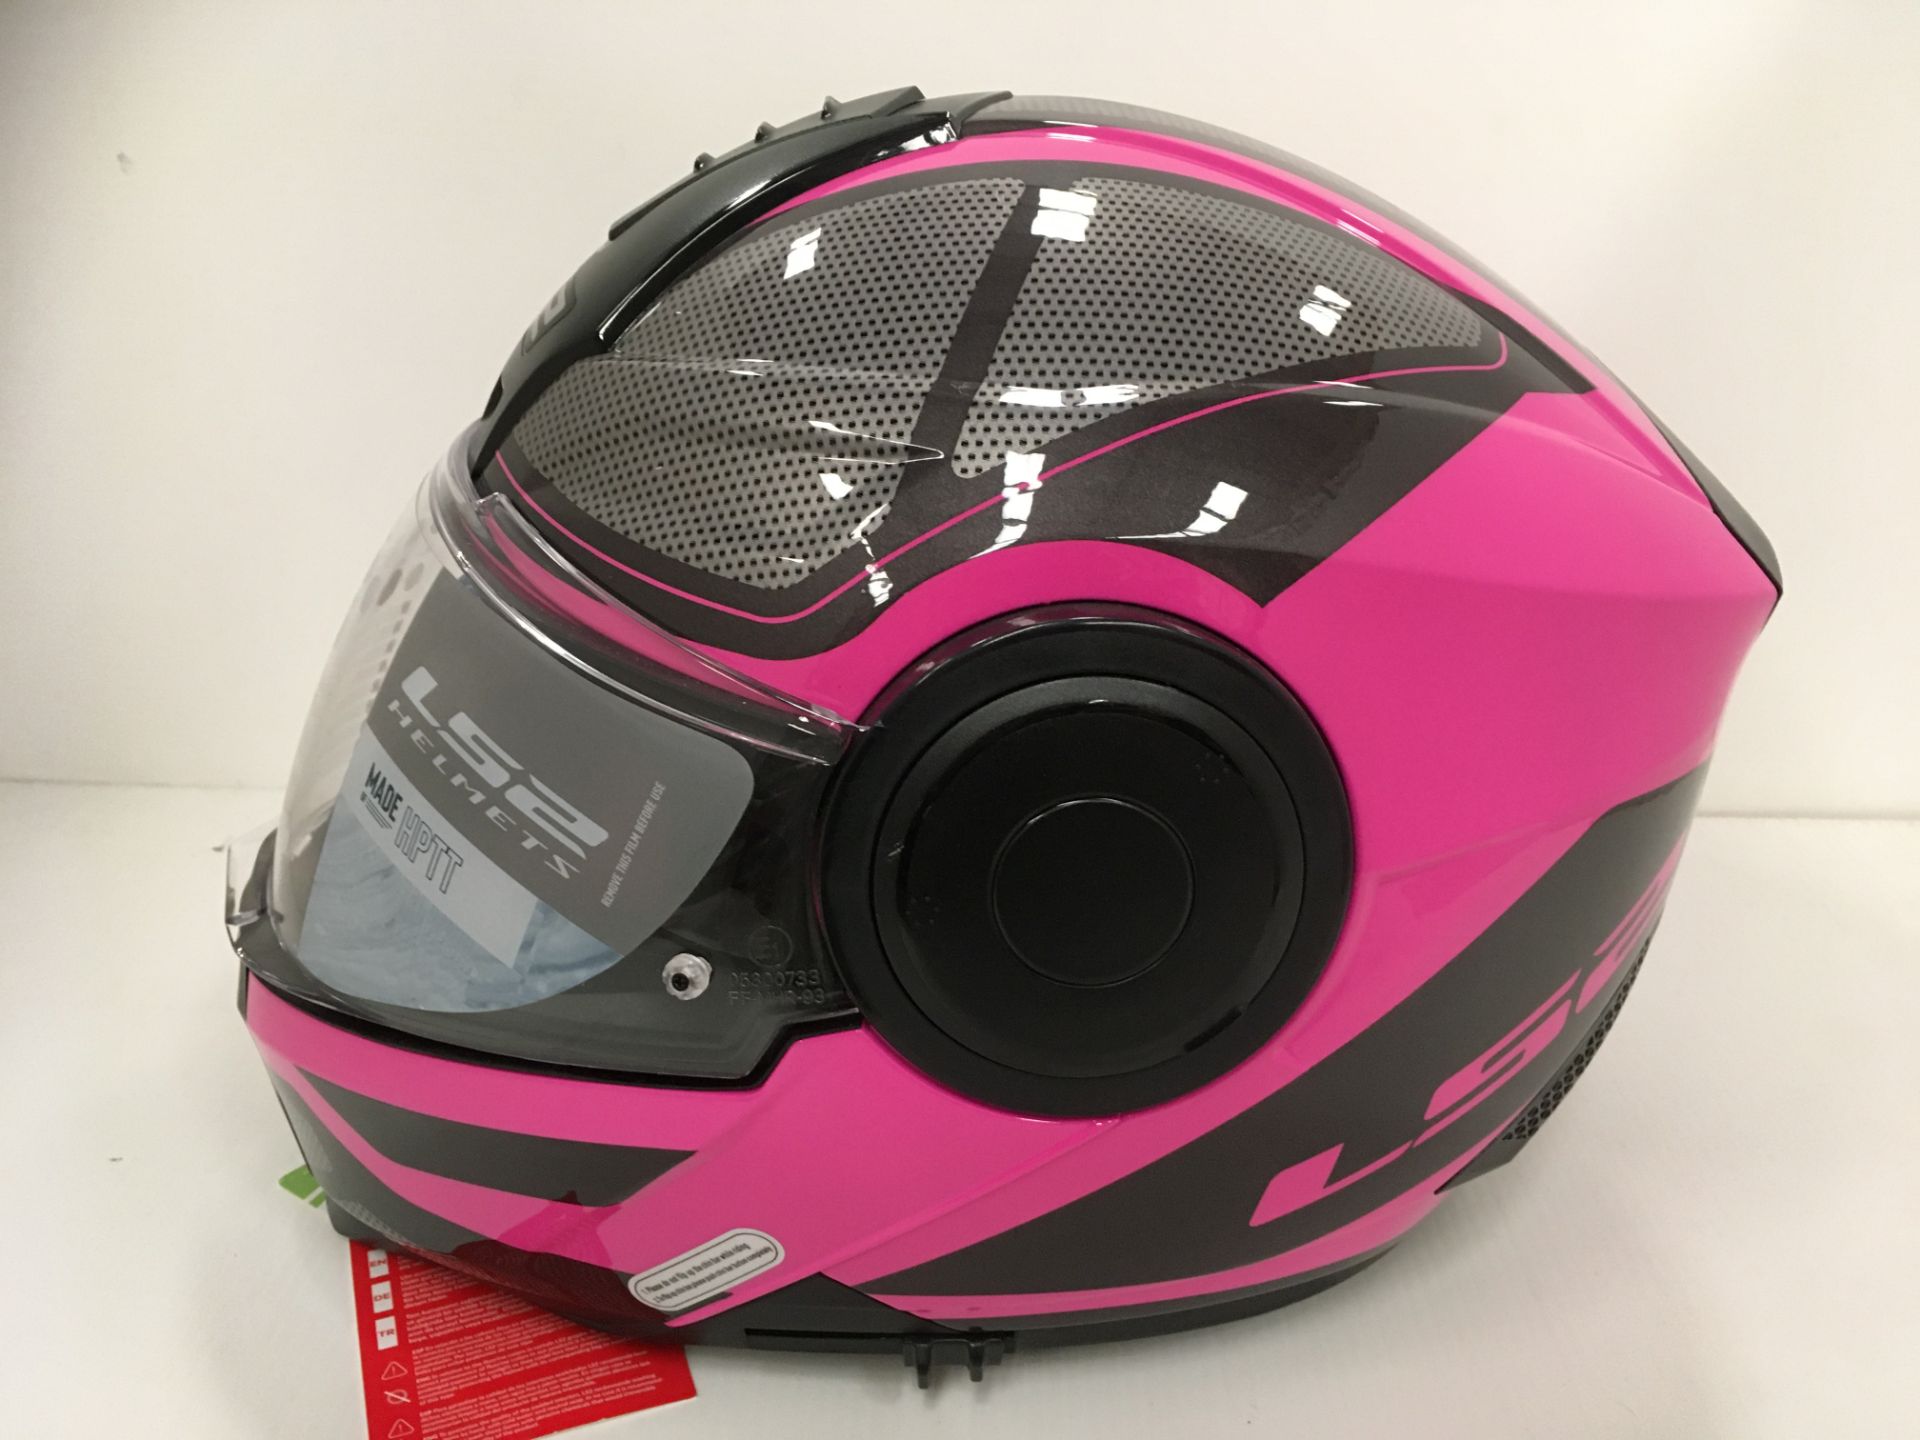 LS2 Scope motorbike helmet with flip up chin guard in pink/black/silver - size XXL (63-64cm) - Image 4 of 5